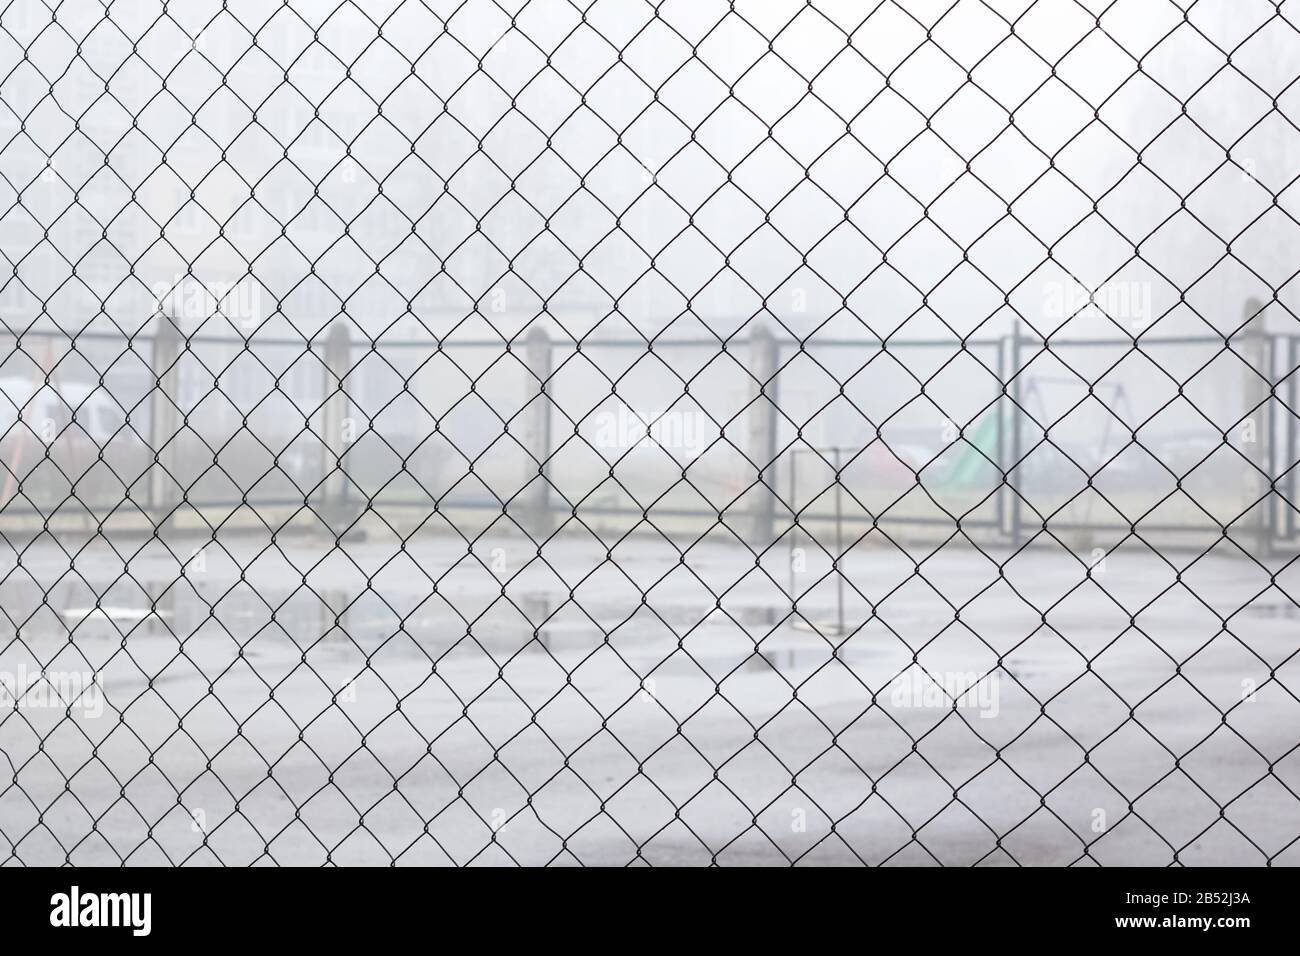 Fence net against backdrop of playground for games in fog Stock Photo